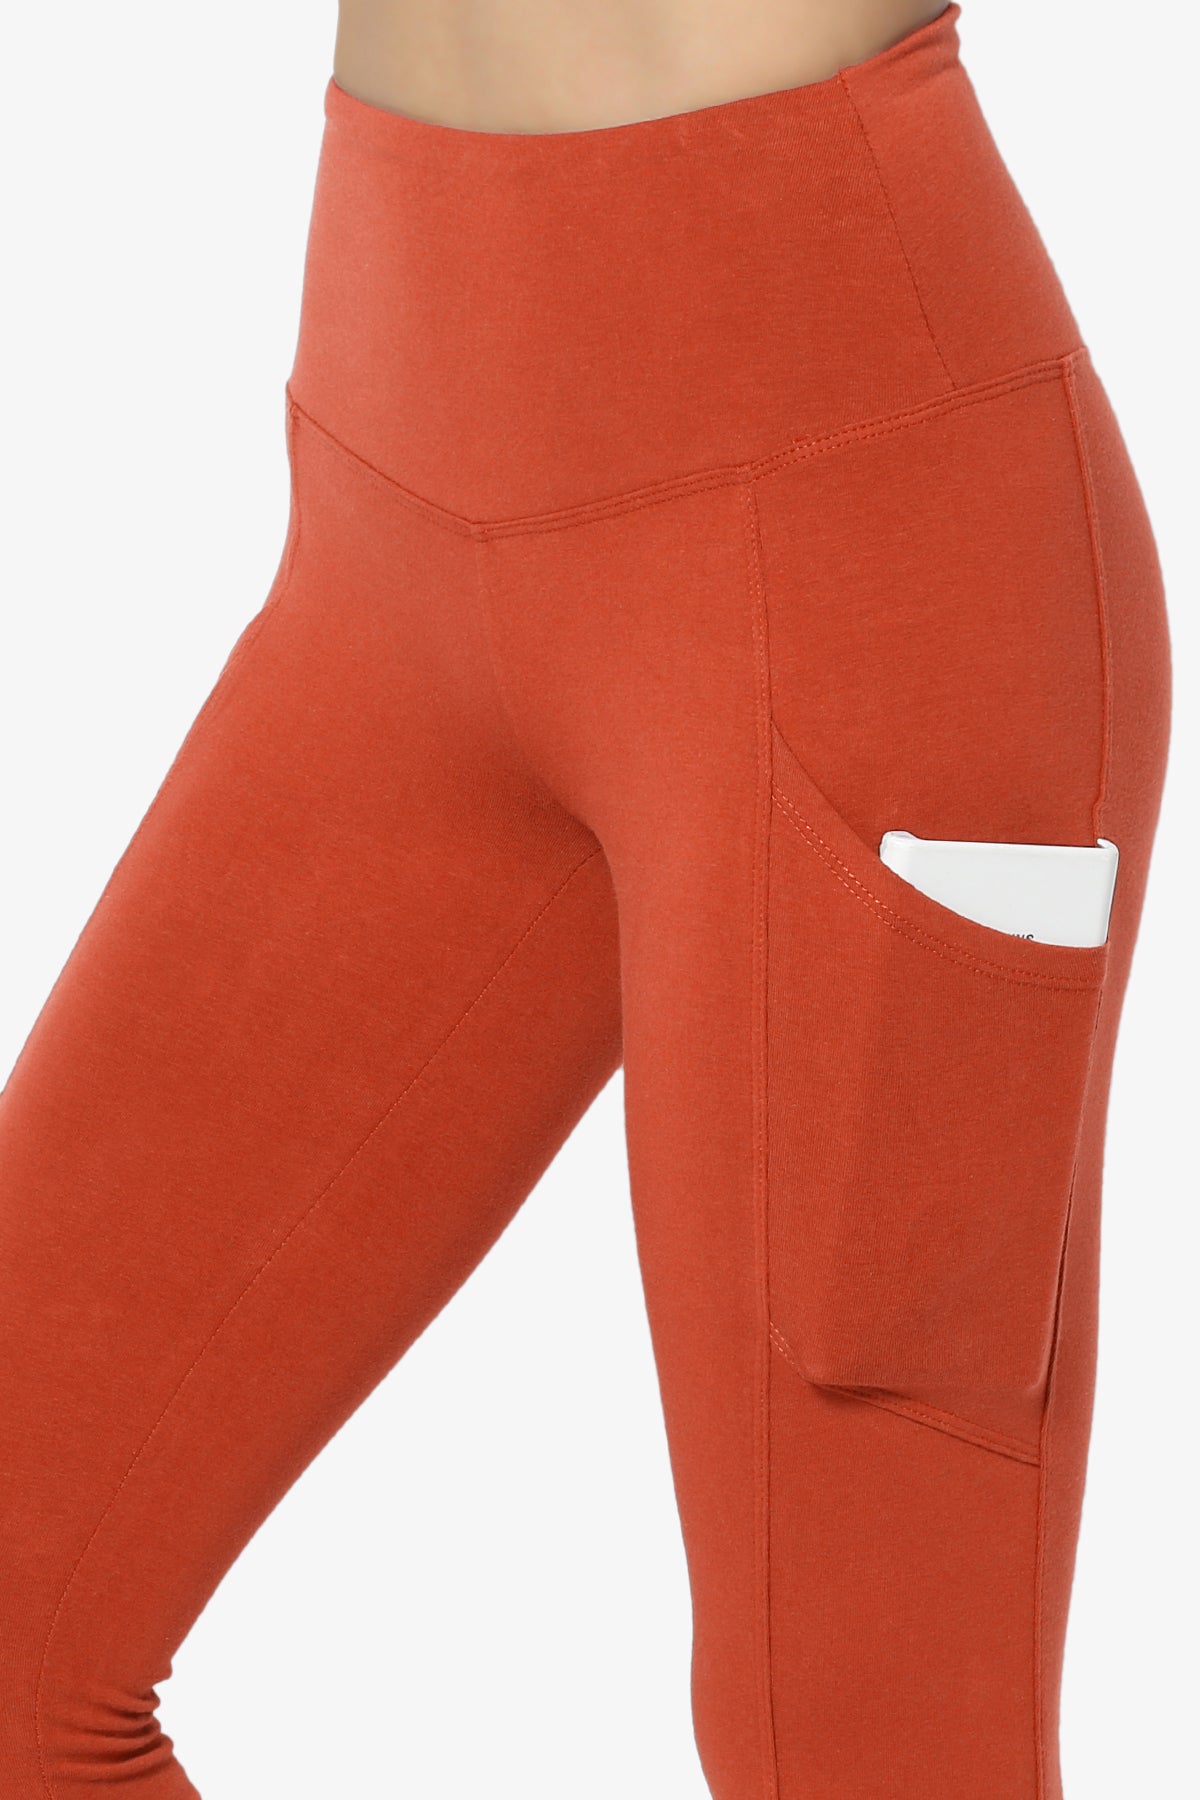 Ansley Luxe Cotton Leggings with Pockets COPPER_5